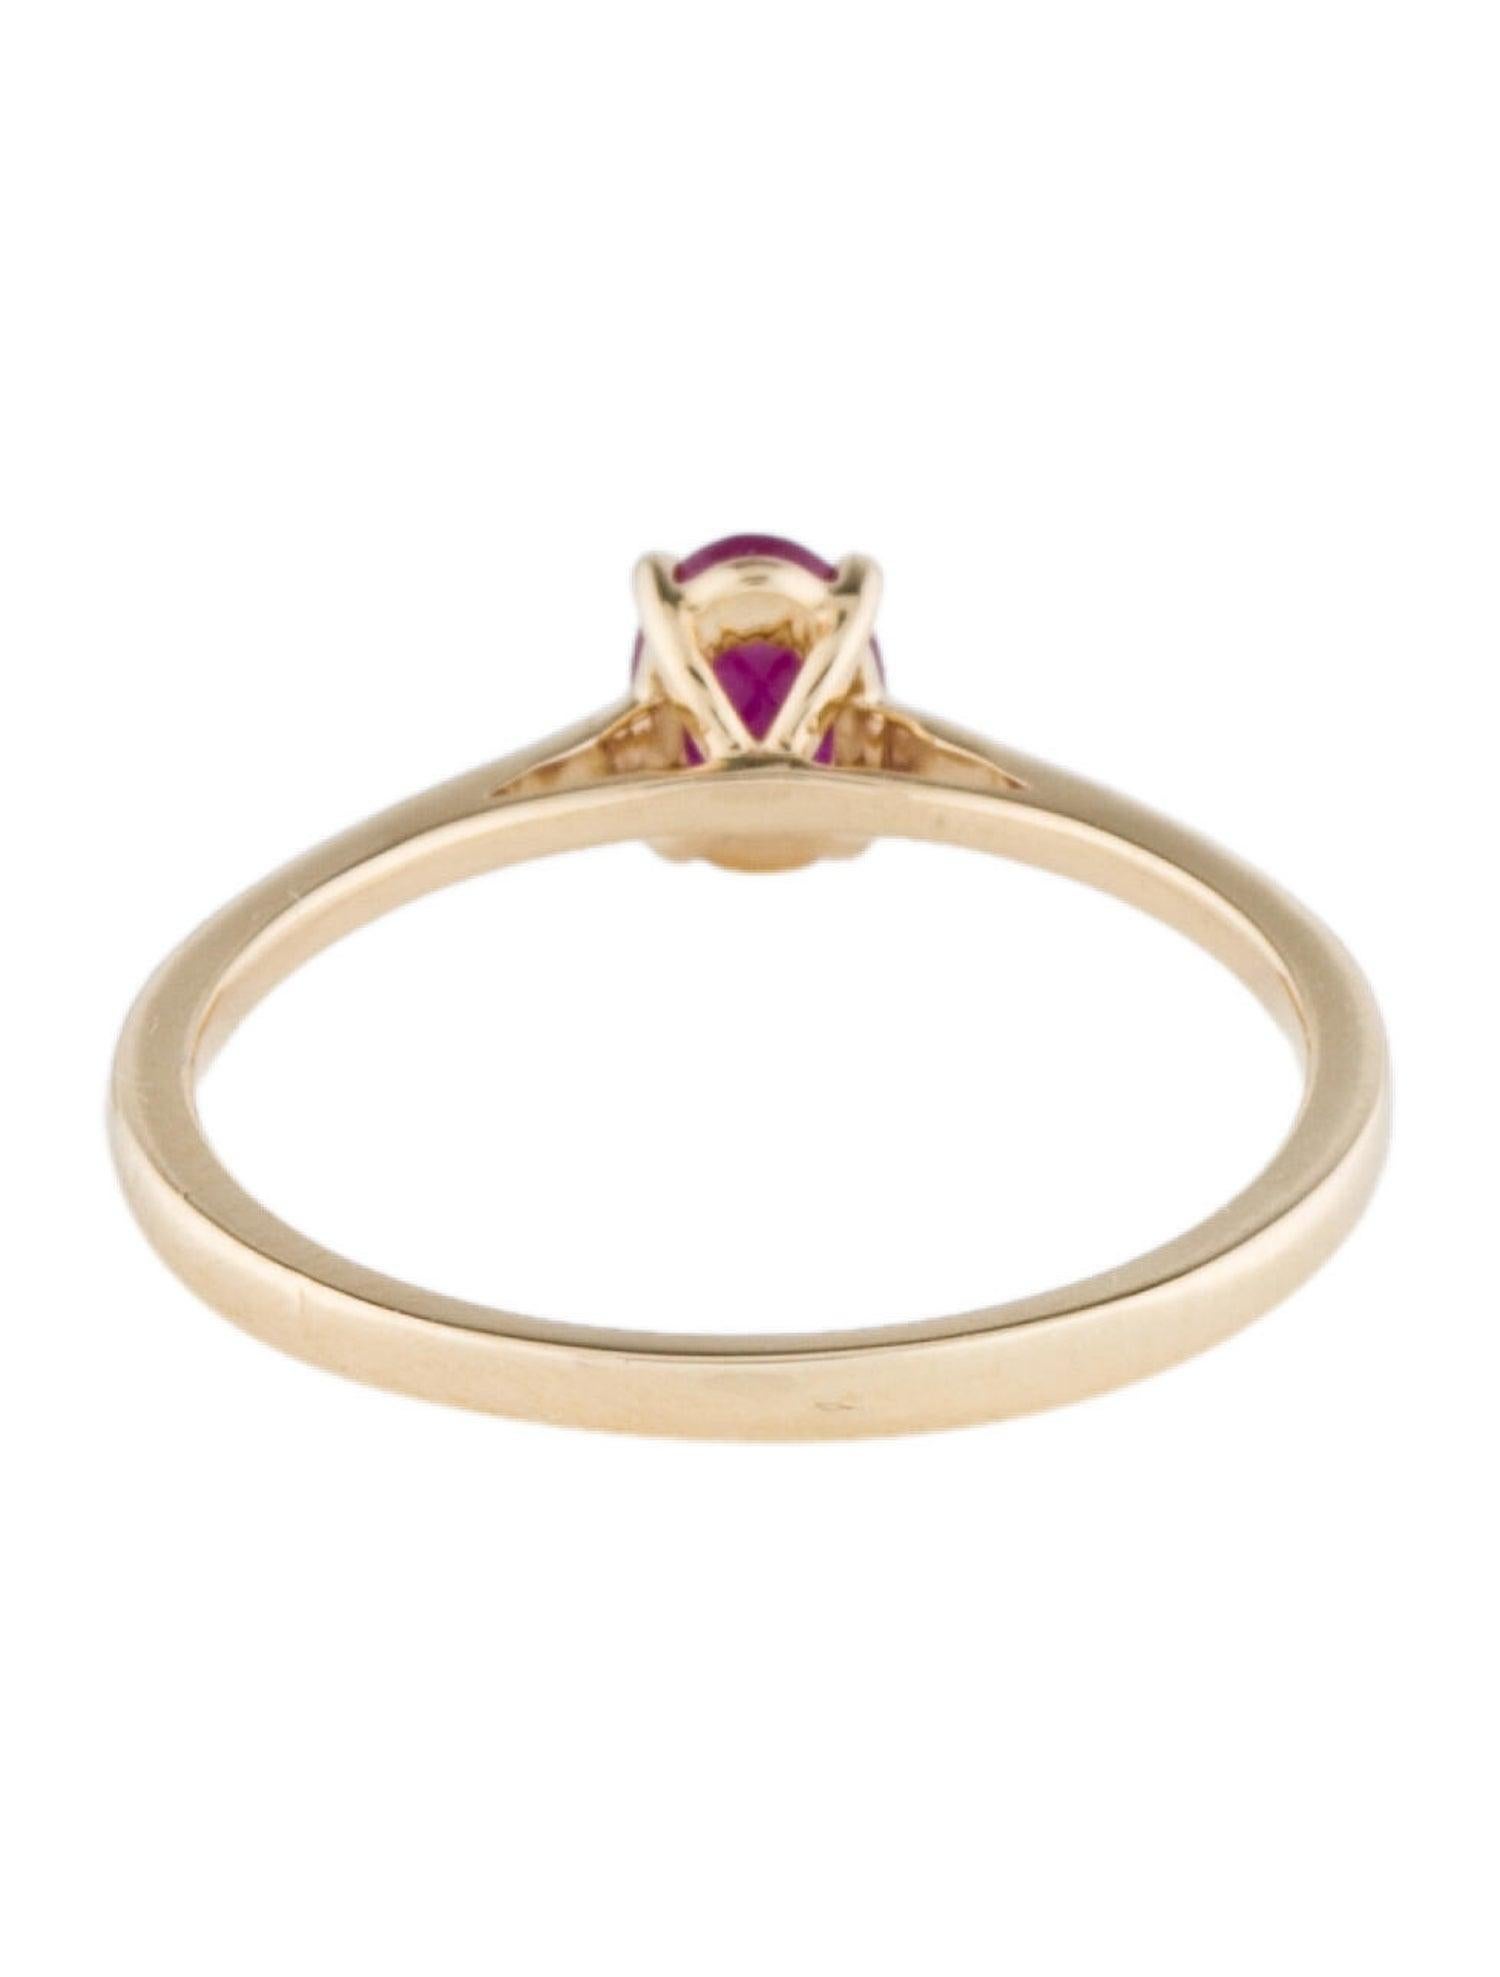 Oval Cut Opulent 14K Ruby Cocktail Ring, Size 7 - Statement Jewelry, Timeless Elegance For Sale